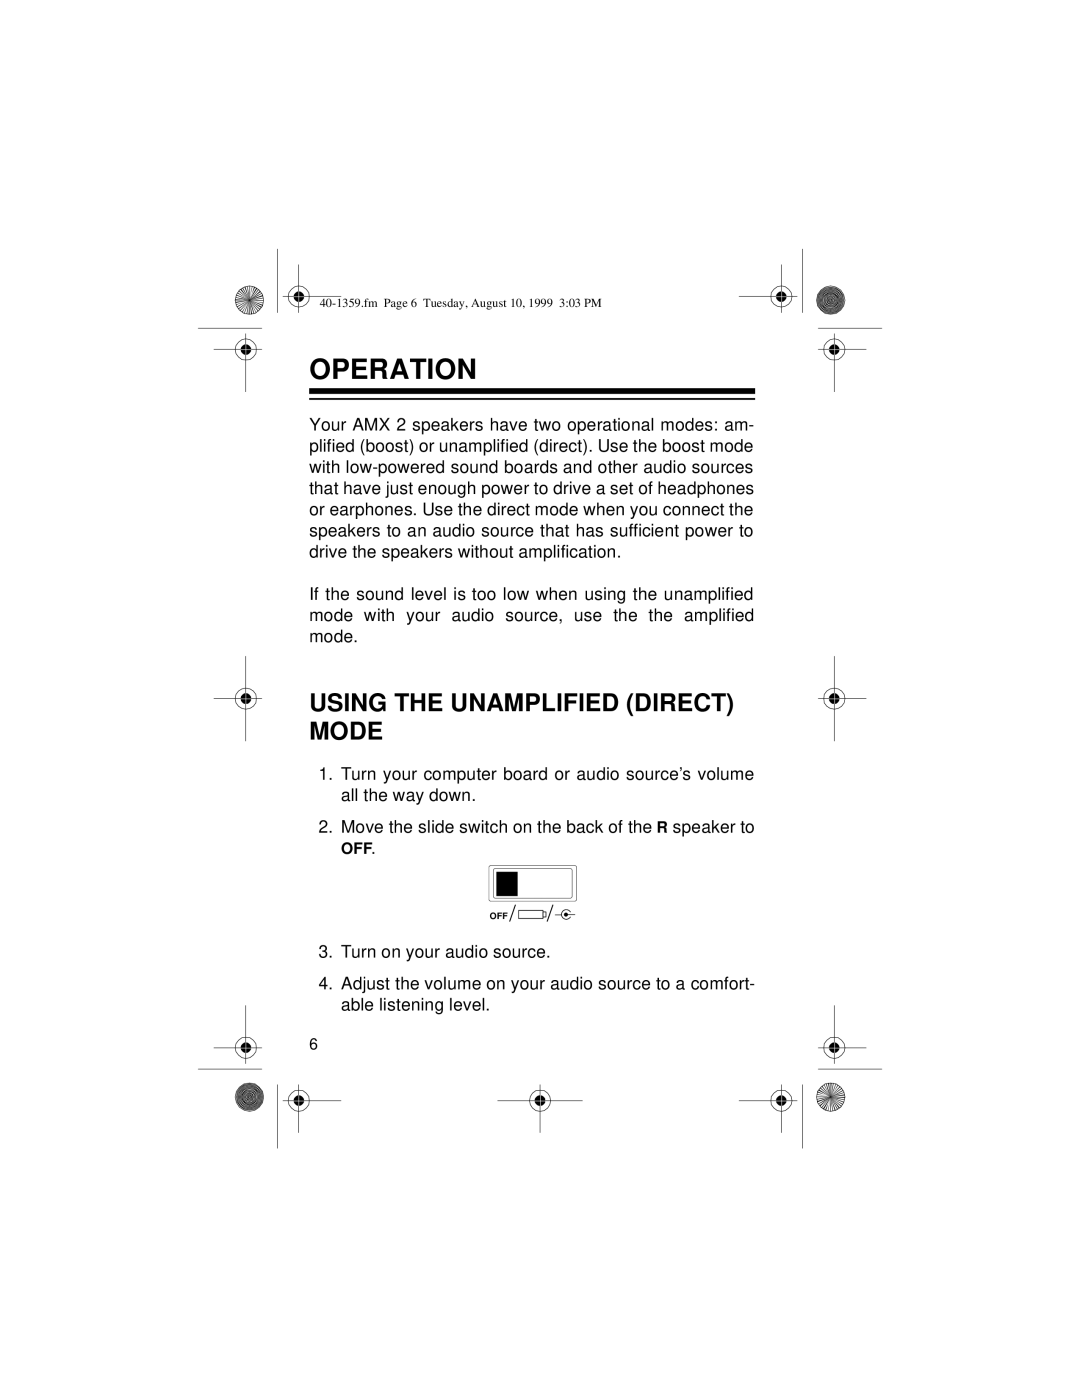 Panasonic AMX 2 owner manual Operation, Using The Unamplified Direct Mode 